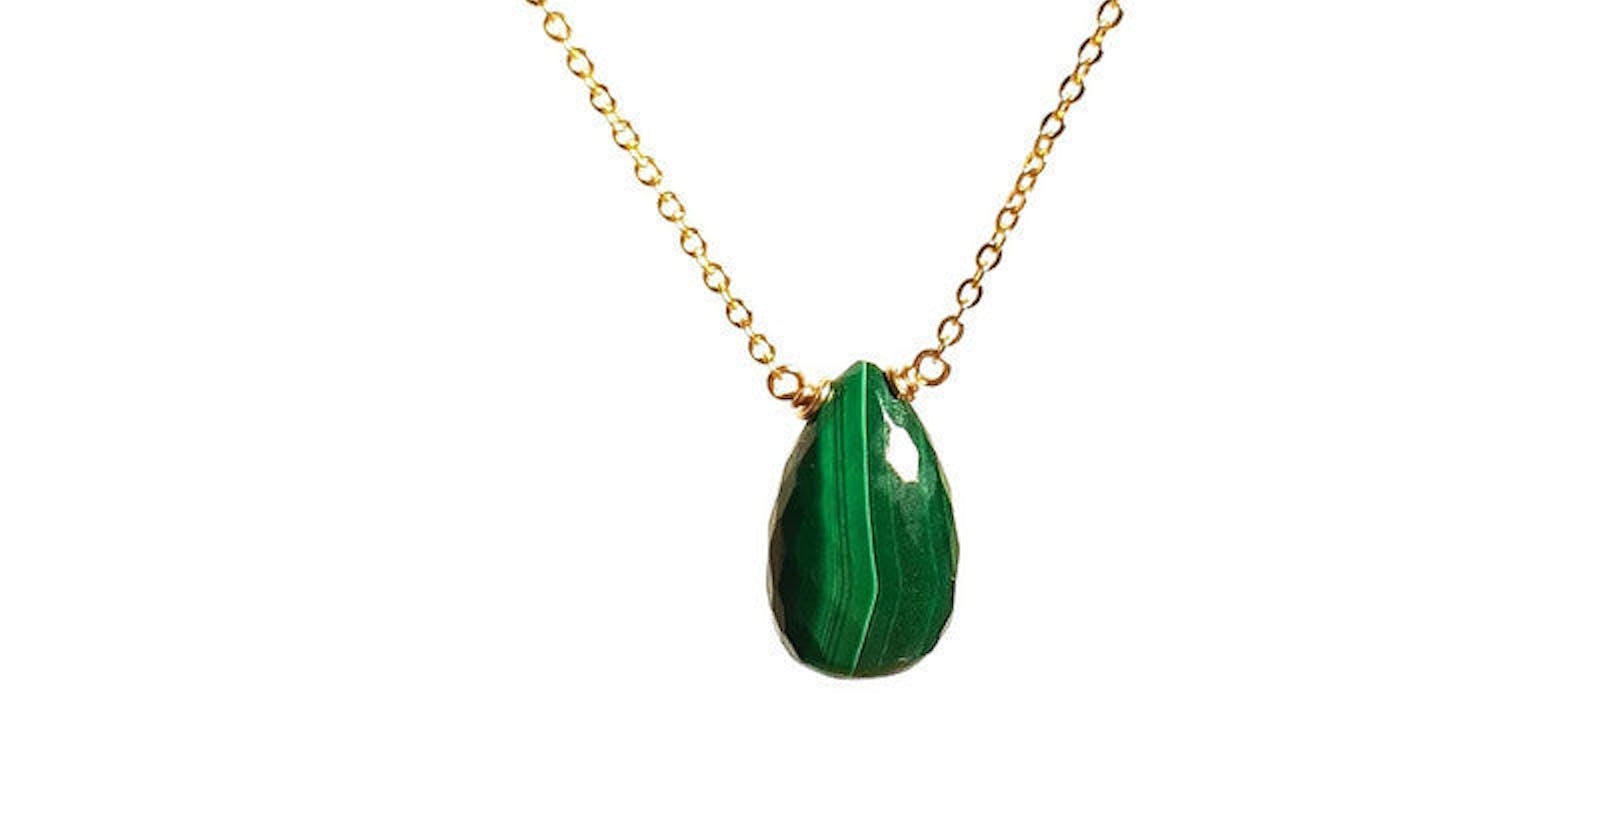 "Malachite Jewelry Collection: Express Your Unique Personality"